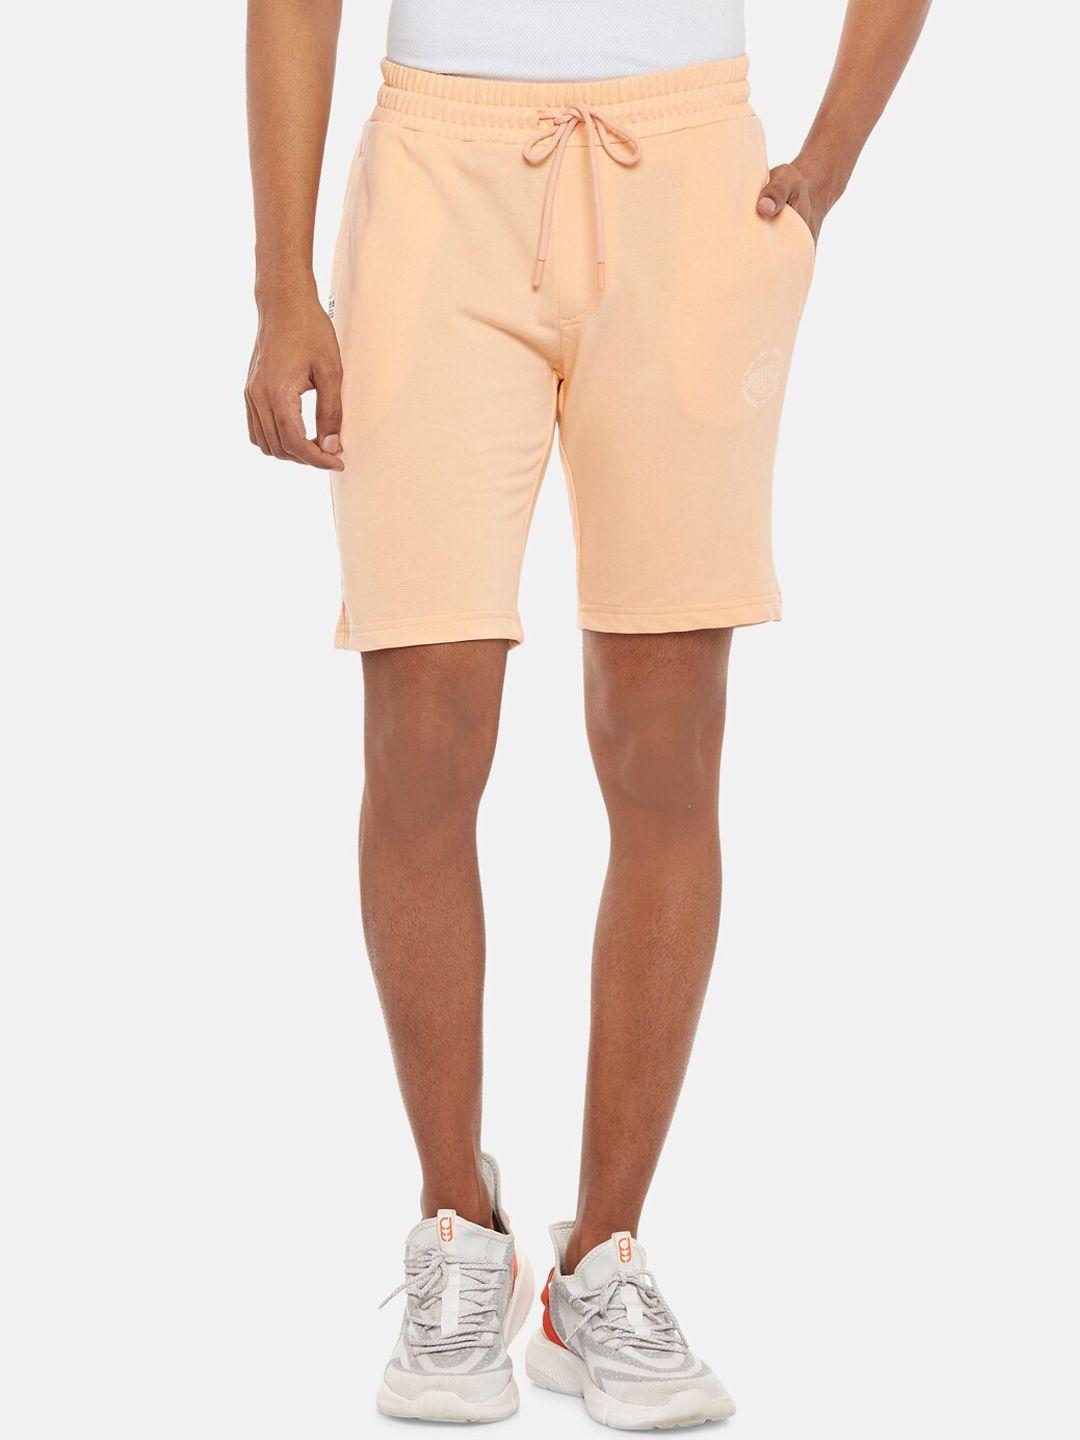 people-men-peach-colored-solid-sports-shorts